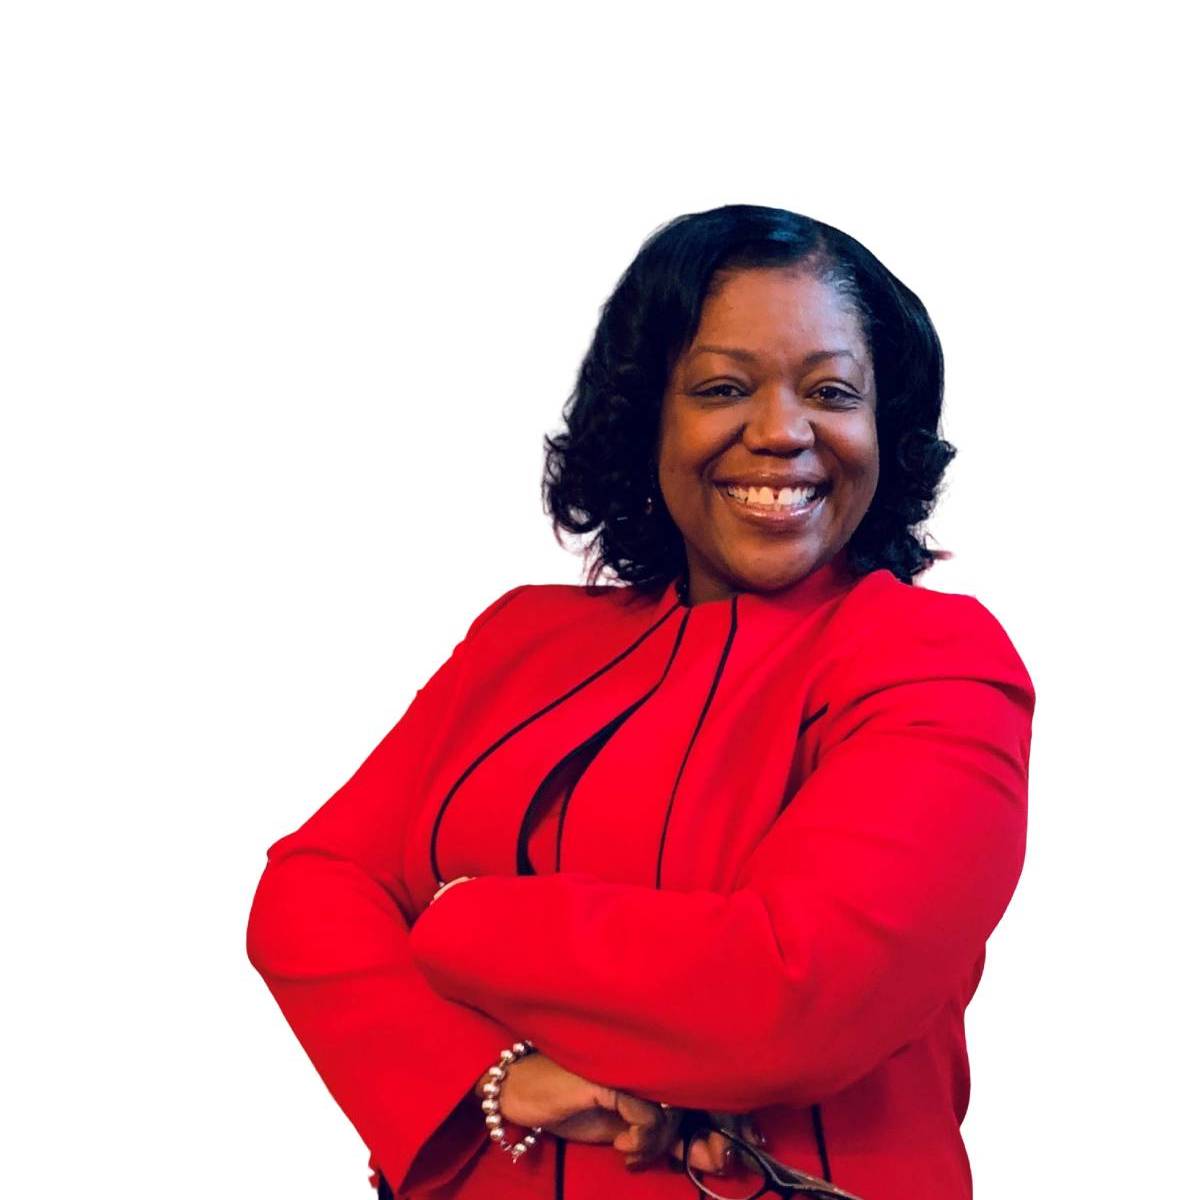 Attorney Paulette Lundy is the founder of the Lundy Law Group, LLC, a law firm in Columbia, MD.